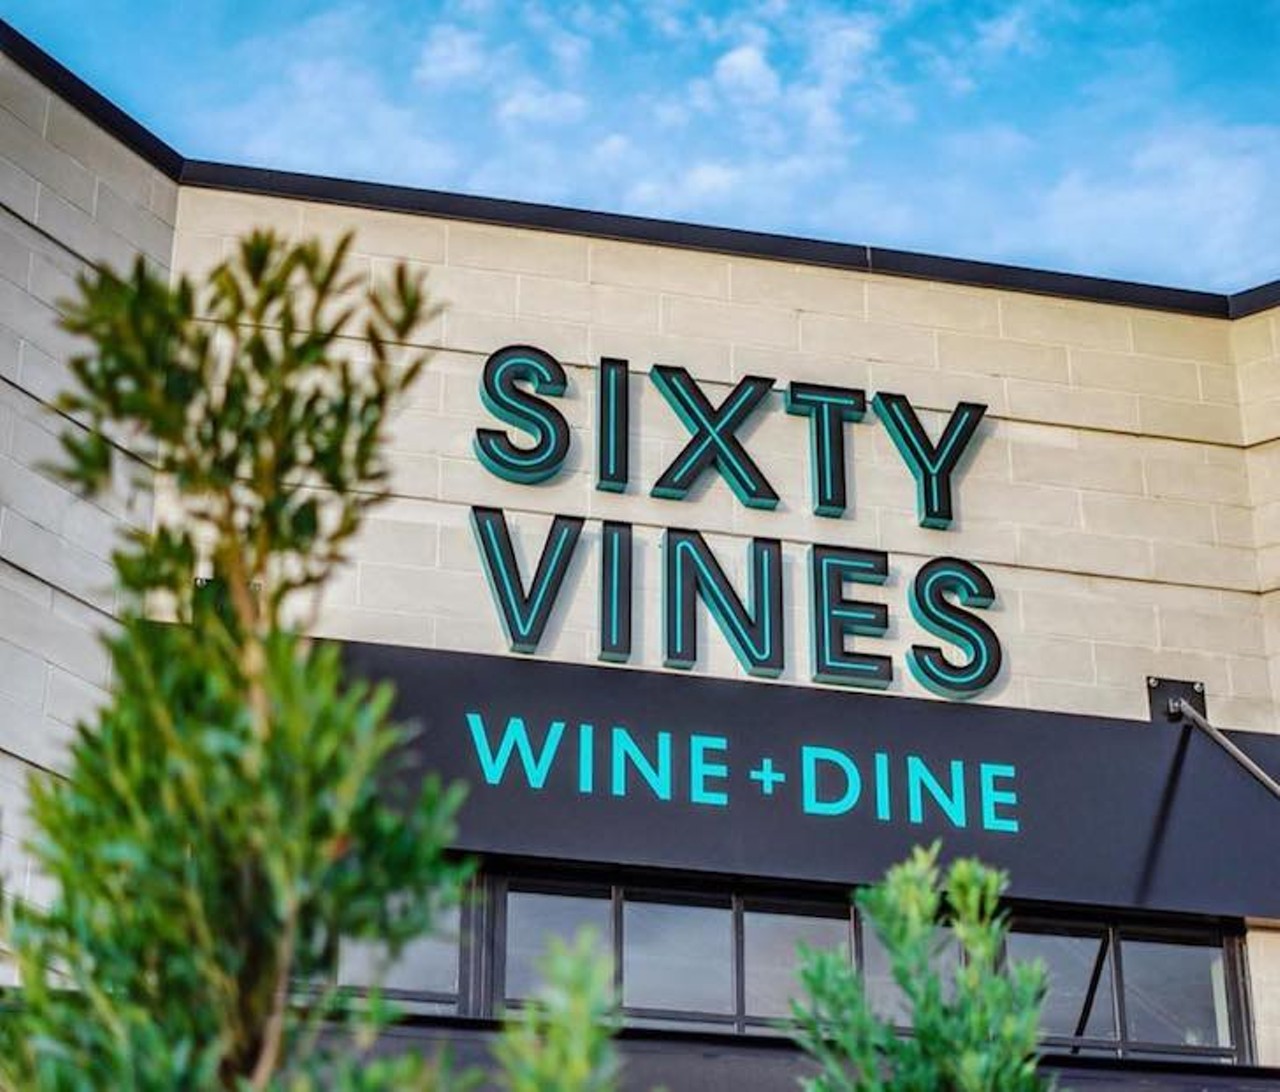 Sixty Vines 
110 Orlando Ave., Winter Park, 407-410-8005
Sixty Vines in Winter Park opened March 17 and was forced to close three days later and offer curbside pickup, carryout and delivery. On May 4, the venue opened for dine-in at 25 percent capacity. Sixty Vines offers a wine-country setting that perfectly pairs wines with specific dishes.
Photo via Sixty Vines/Facebook